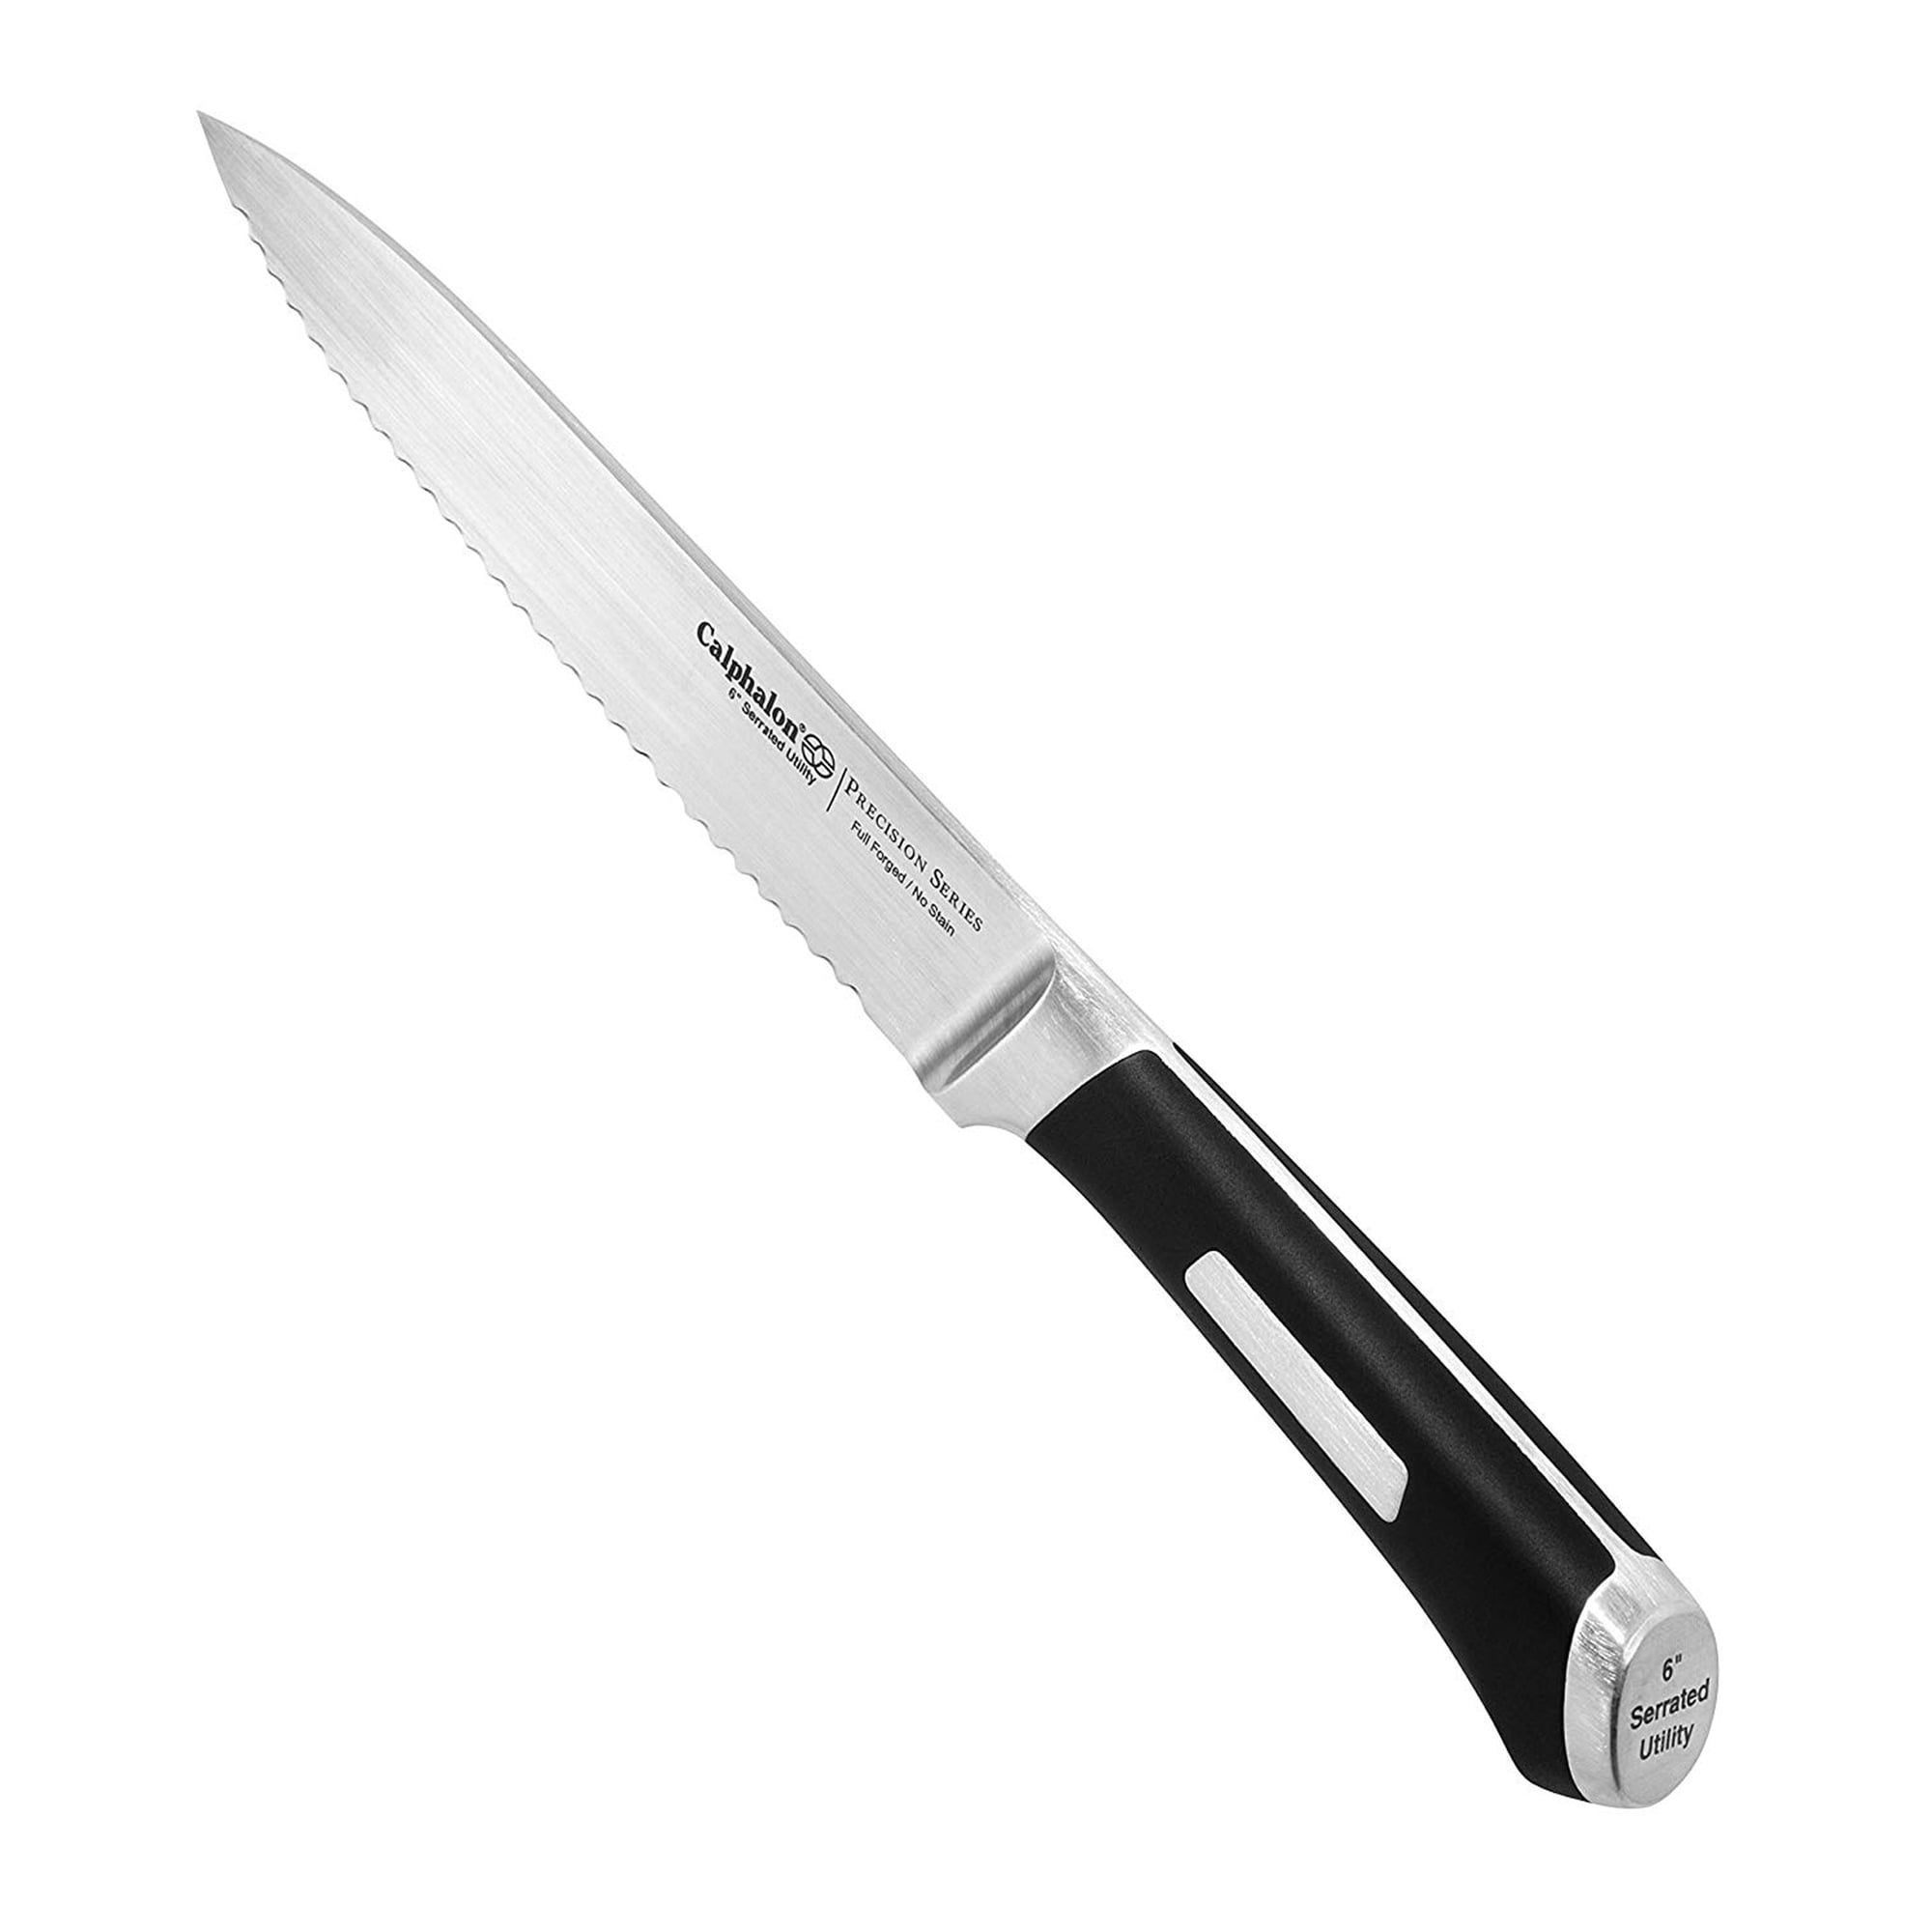 Are Calphalon Kitchen Knives Any Good? (In-Depth Review) - Prudent